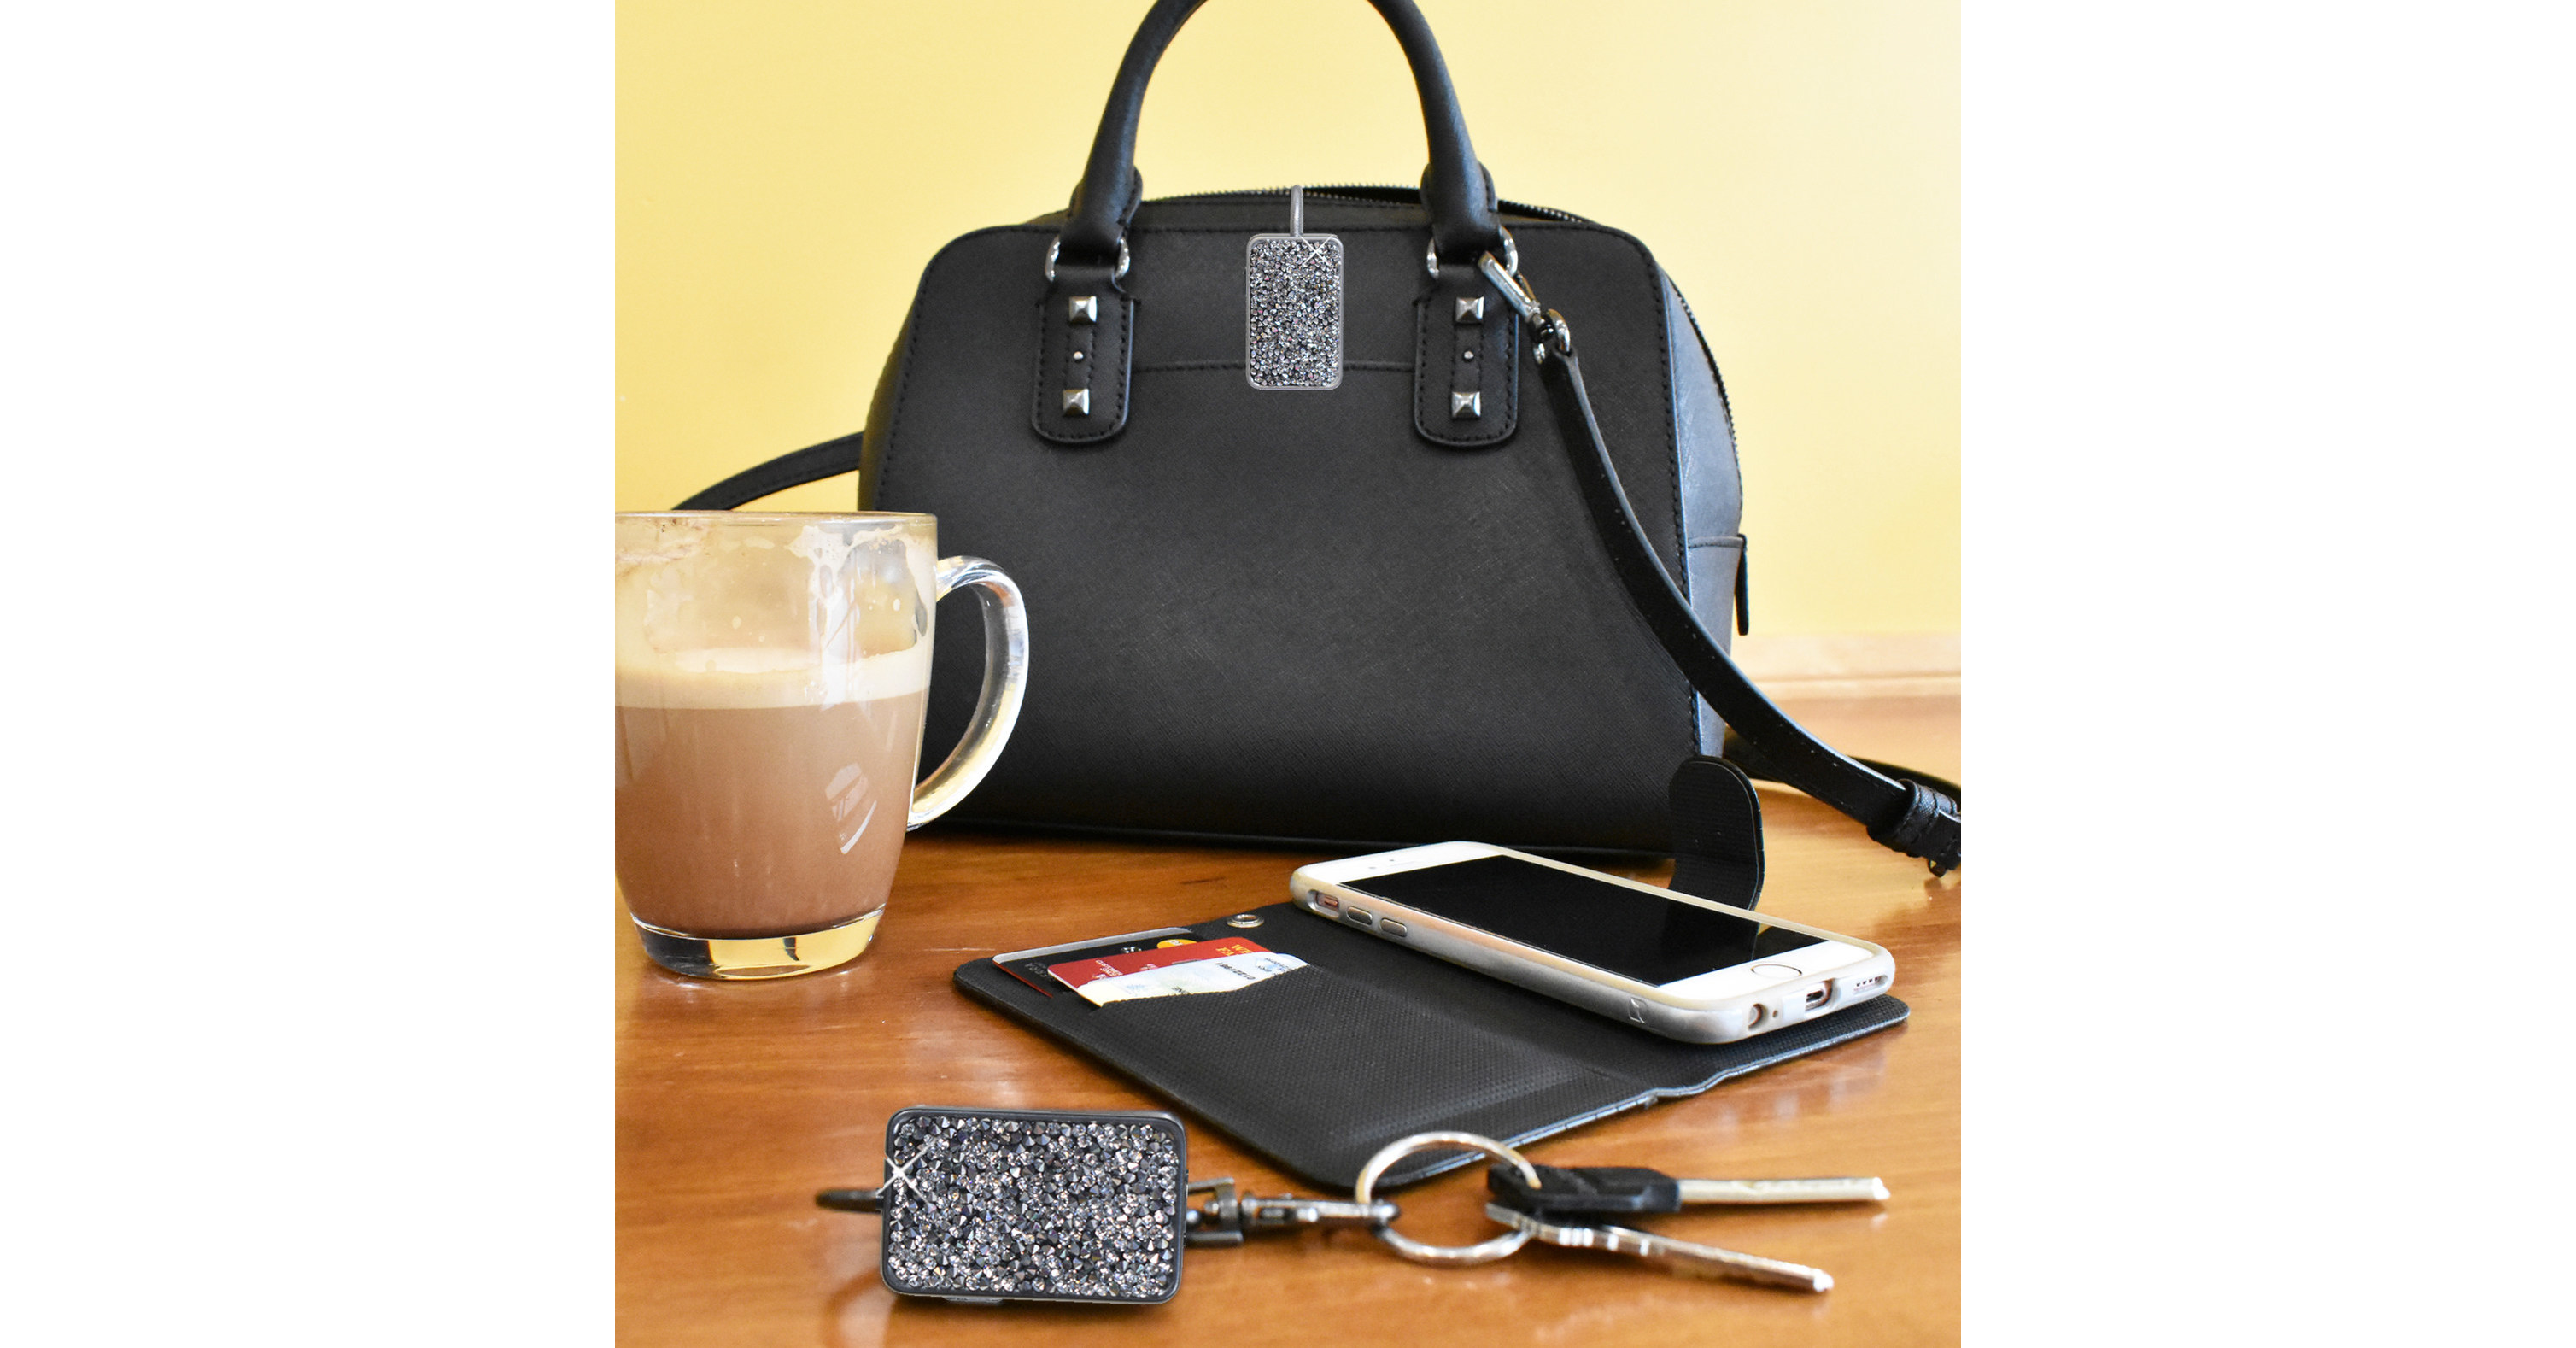 Finders Key Purse Plus™ Brings Safety Into the Bluetooth Tracking Space